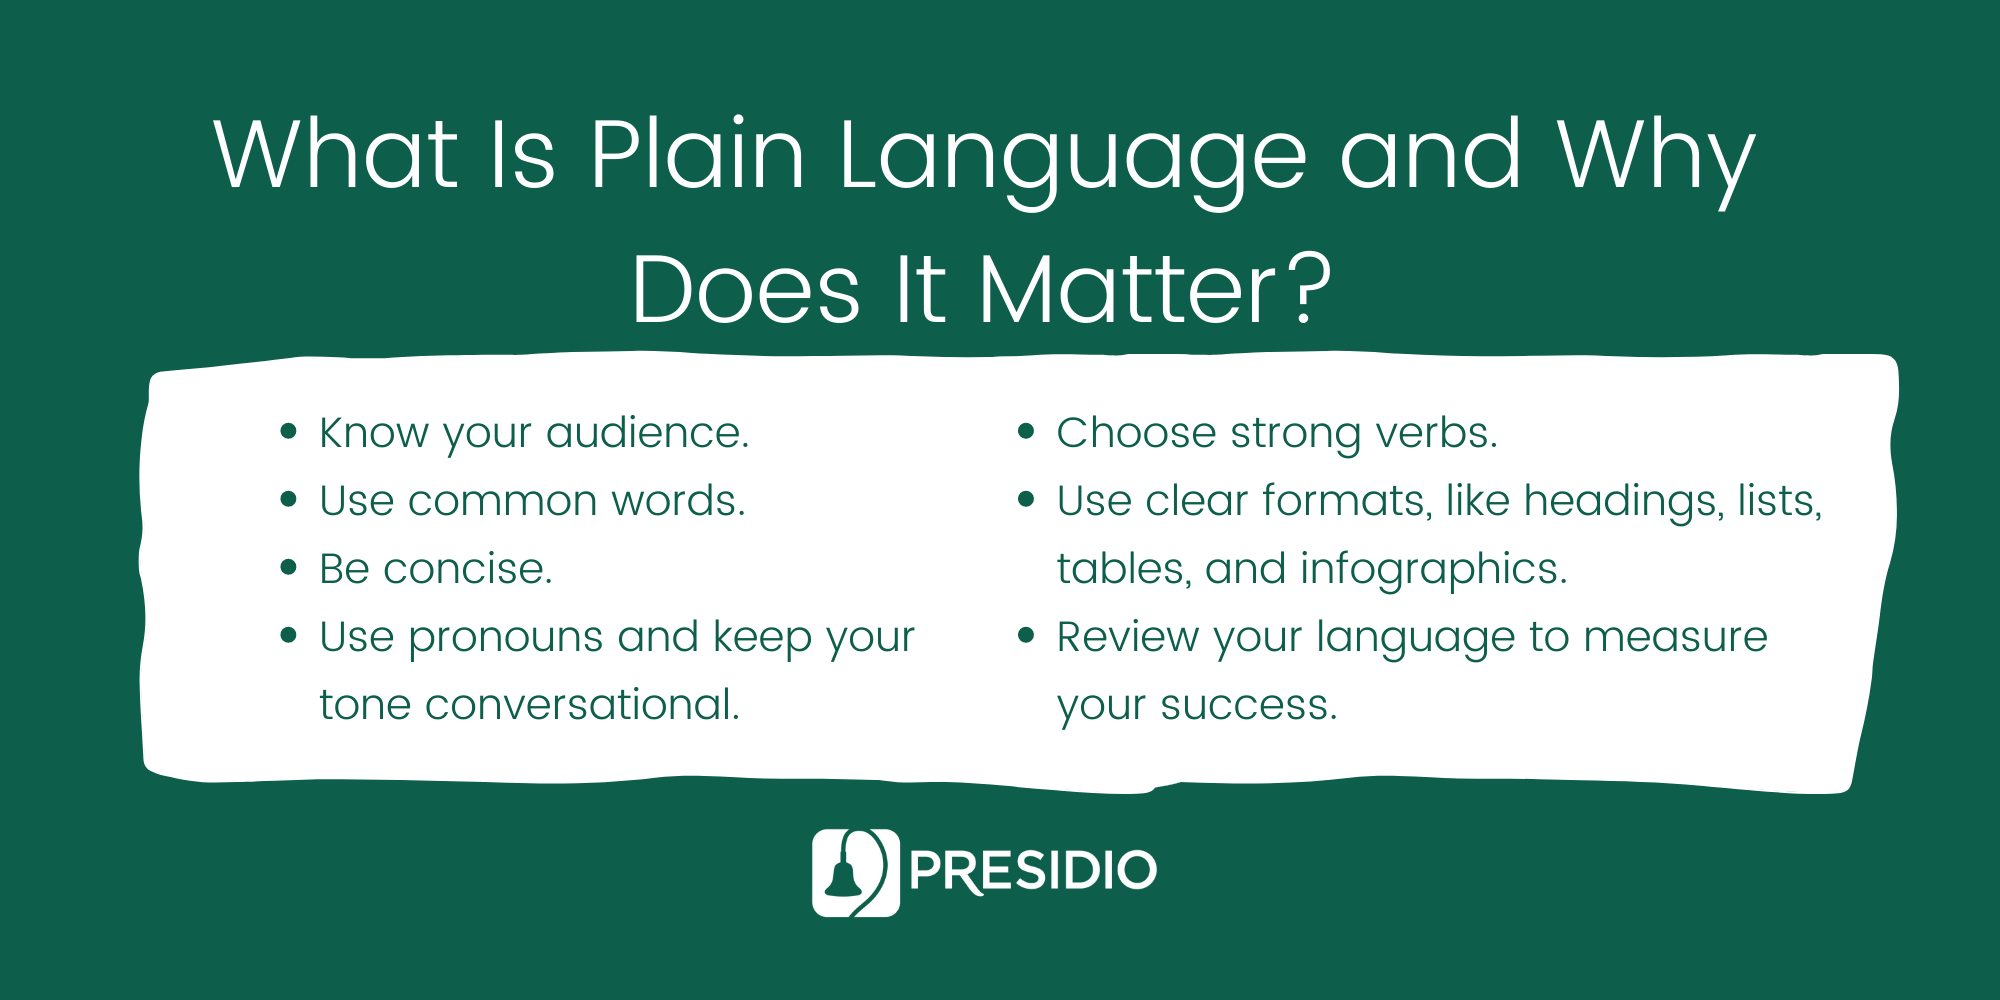 What Is Plain Language and Why Does It Matter?